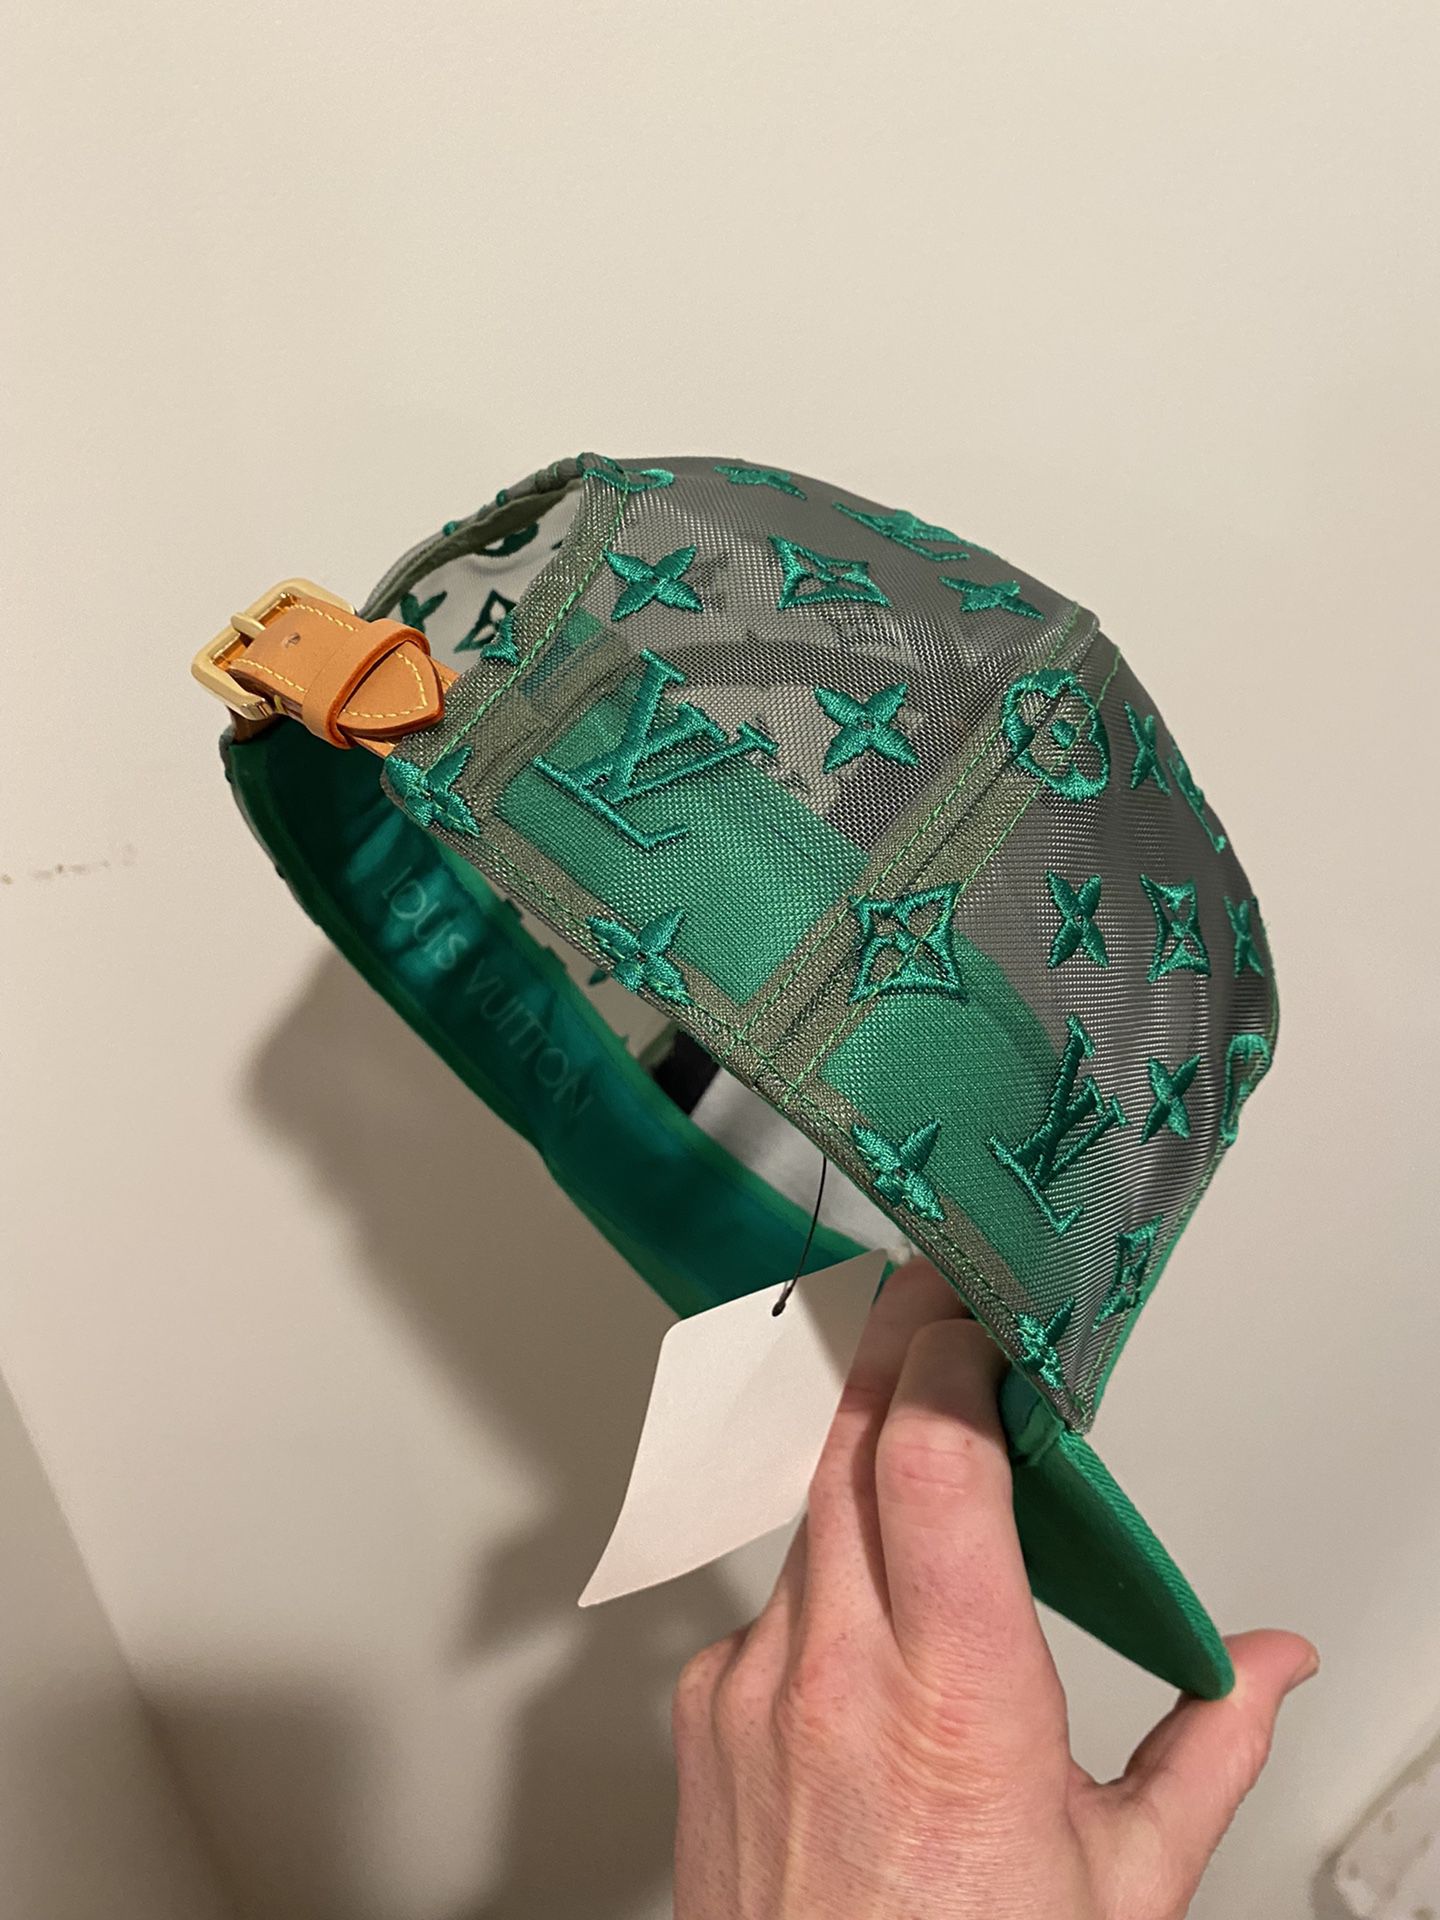 Louis Vuitton beanie & scarf set for Sale in Sunnyvale, CA - OfferUp